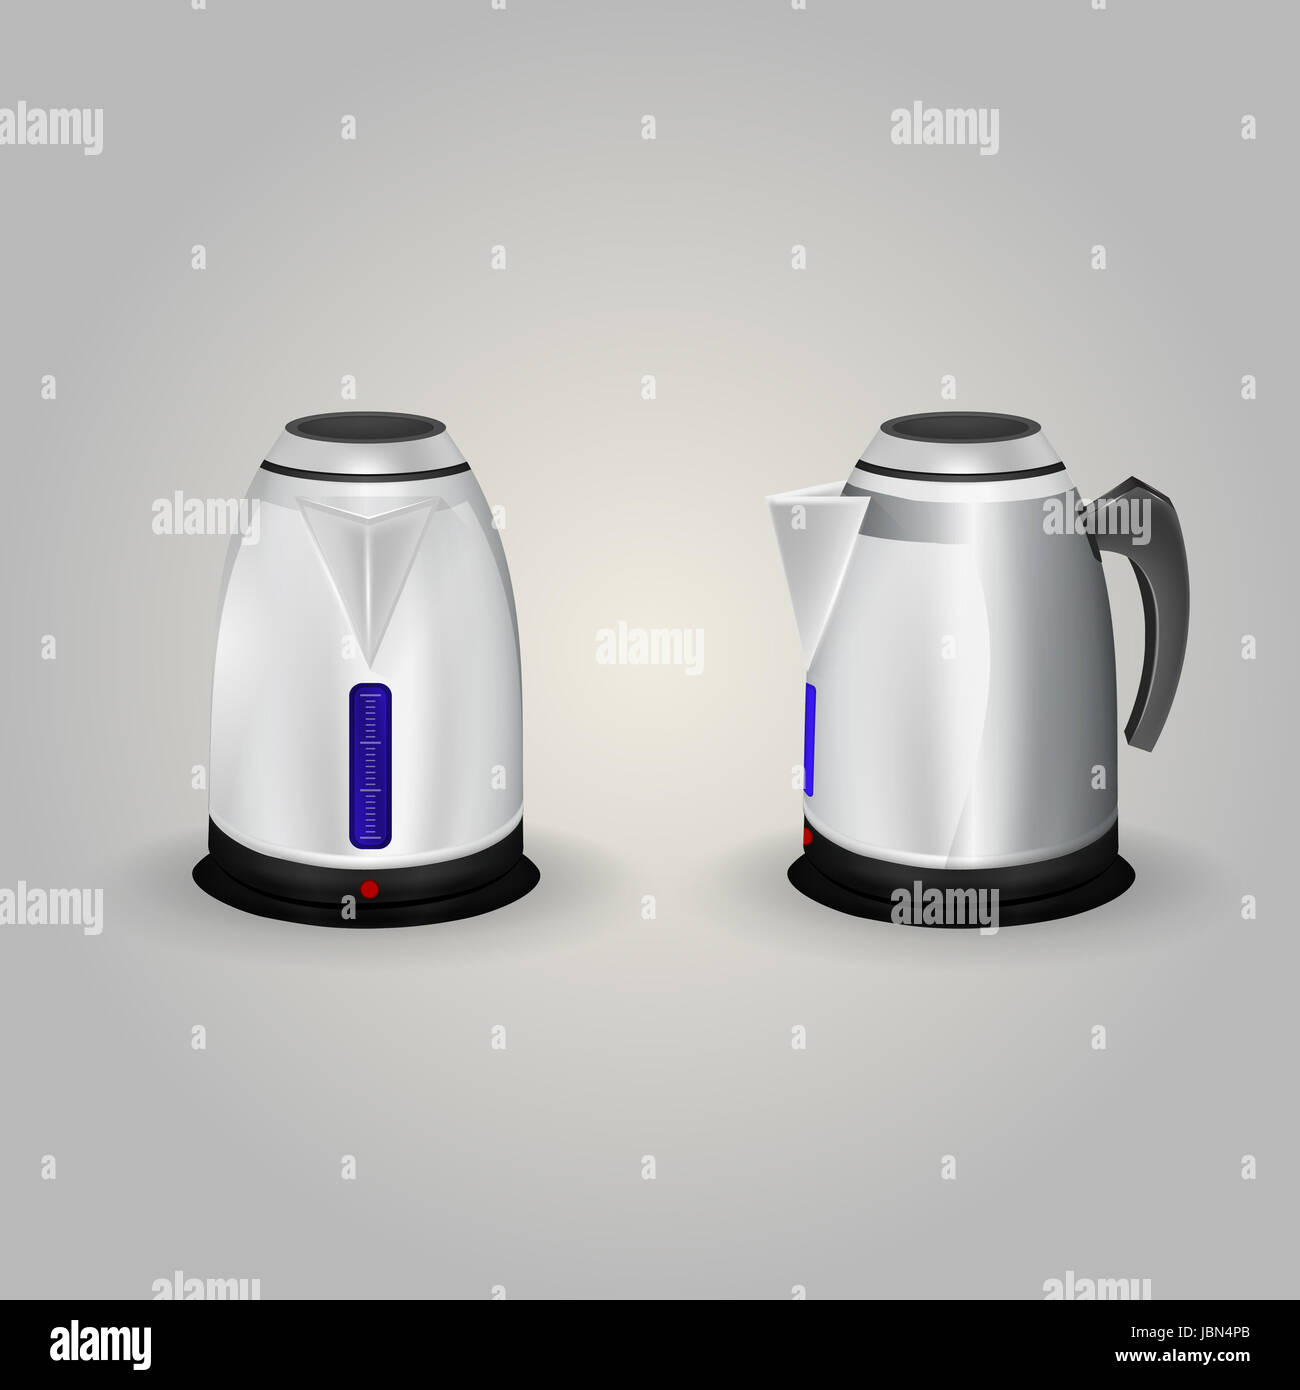 https://c8.alamy.com/comp/JBN4PB/two-metallic-electric-kettles-with-blue-water-level-isolated-vector-JBN4PB.jpg